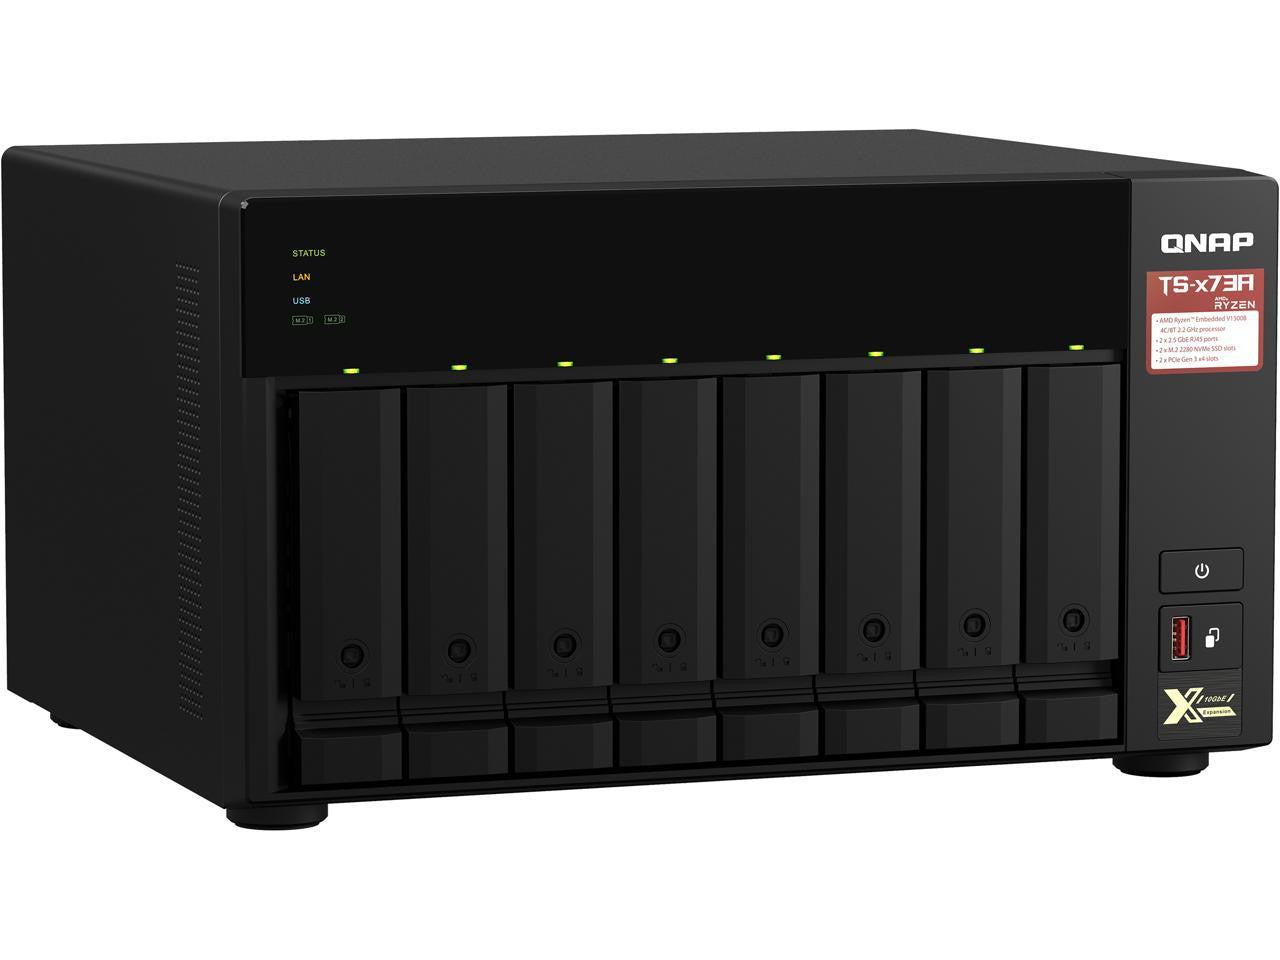 QNAP TS-873A 8-BAY NAS with 16GB DDR4 RAM and 96TB (8x12TB) Seagate Ironwolf NAS Drives Fully Assembled and Tested